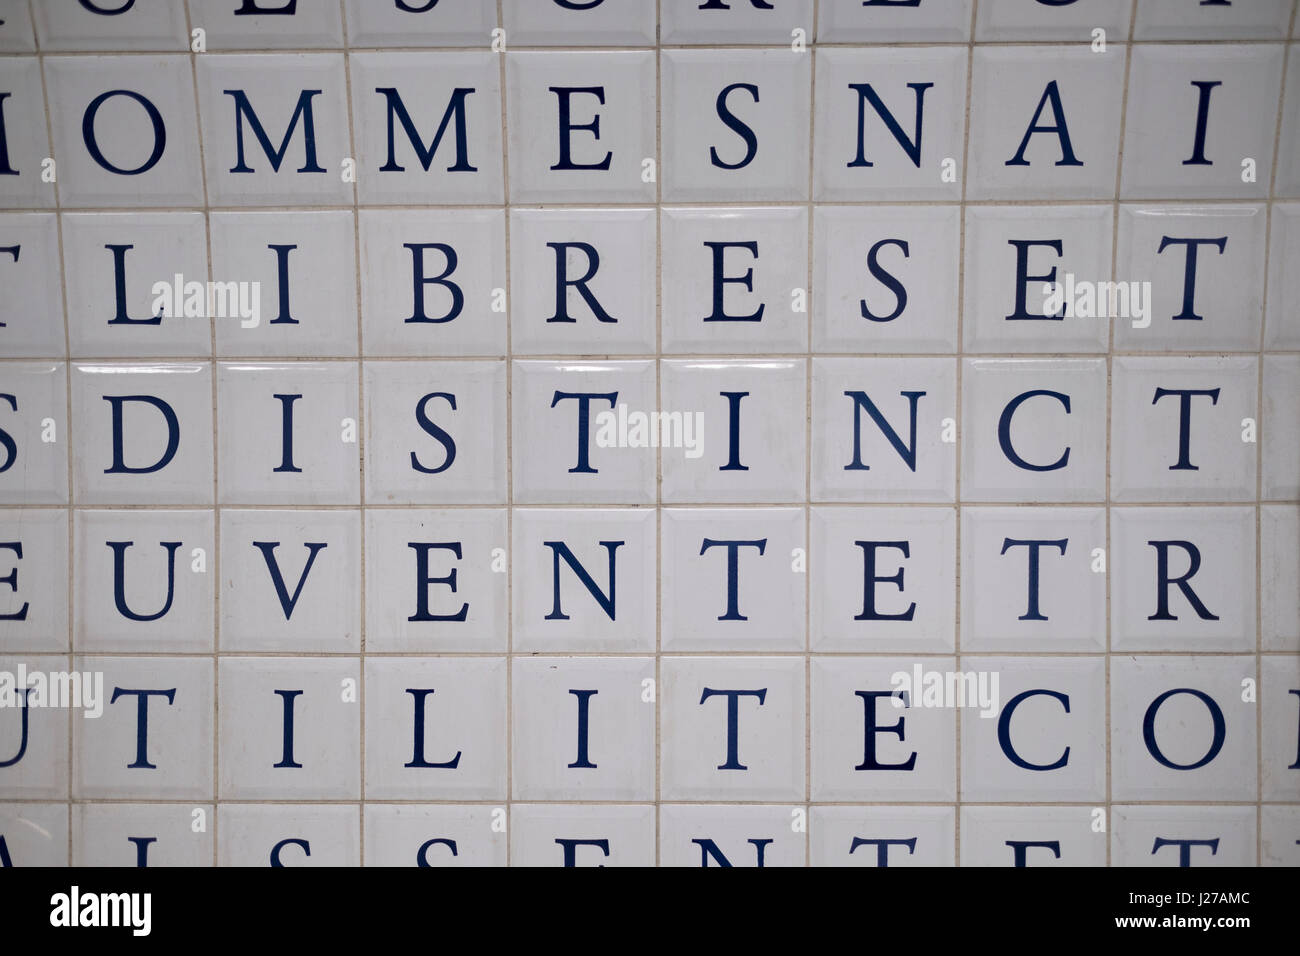 Words constructed from the letter tiles at the Place de la Concorde station in Paris, France. Stock Photo